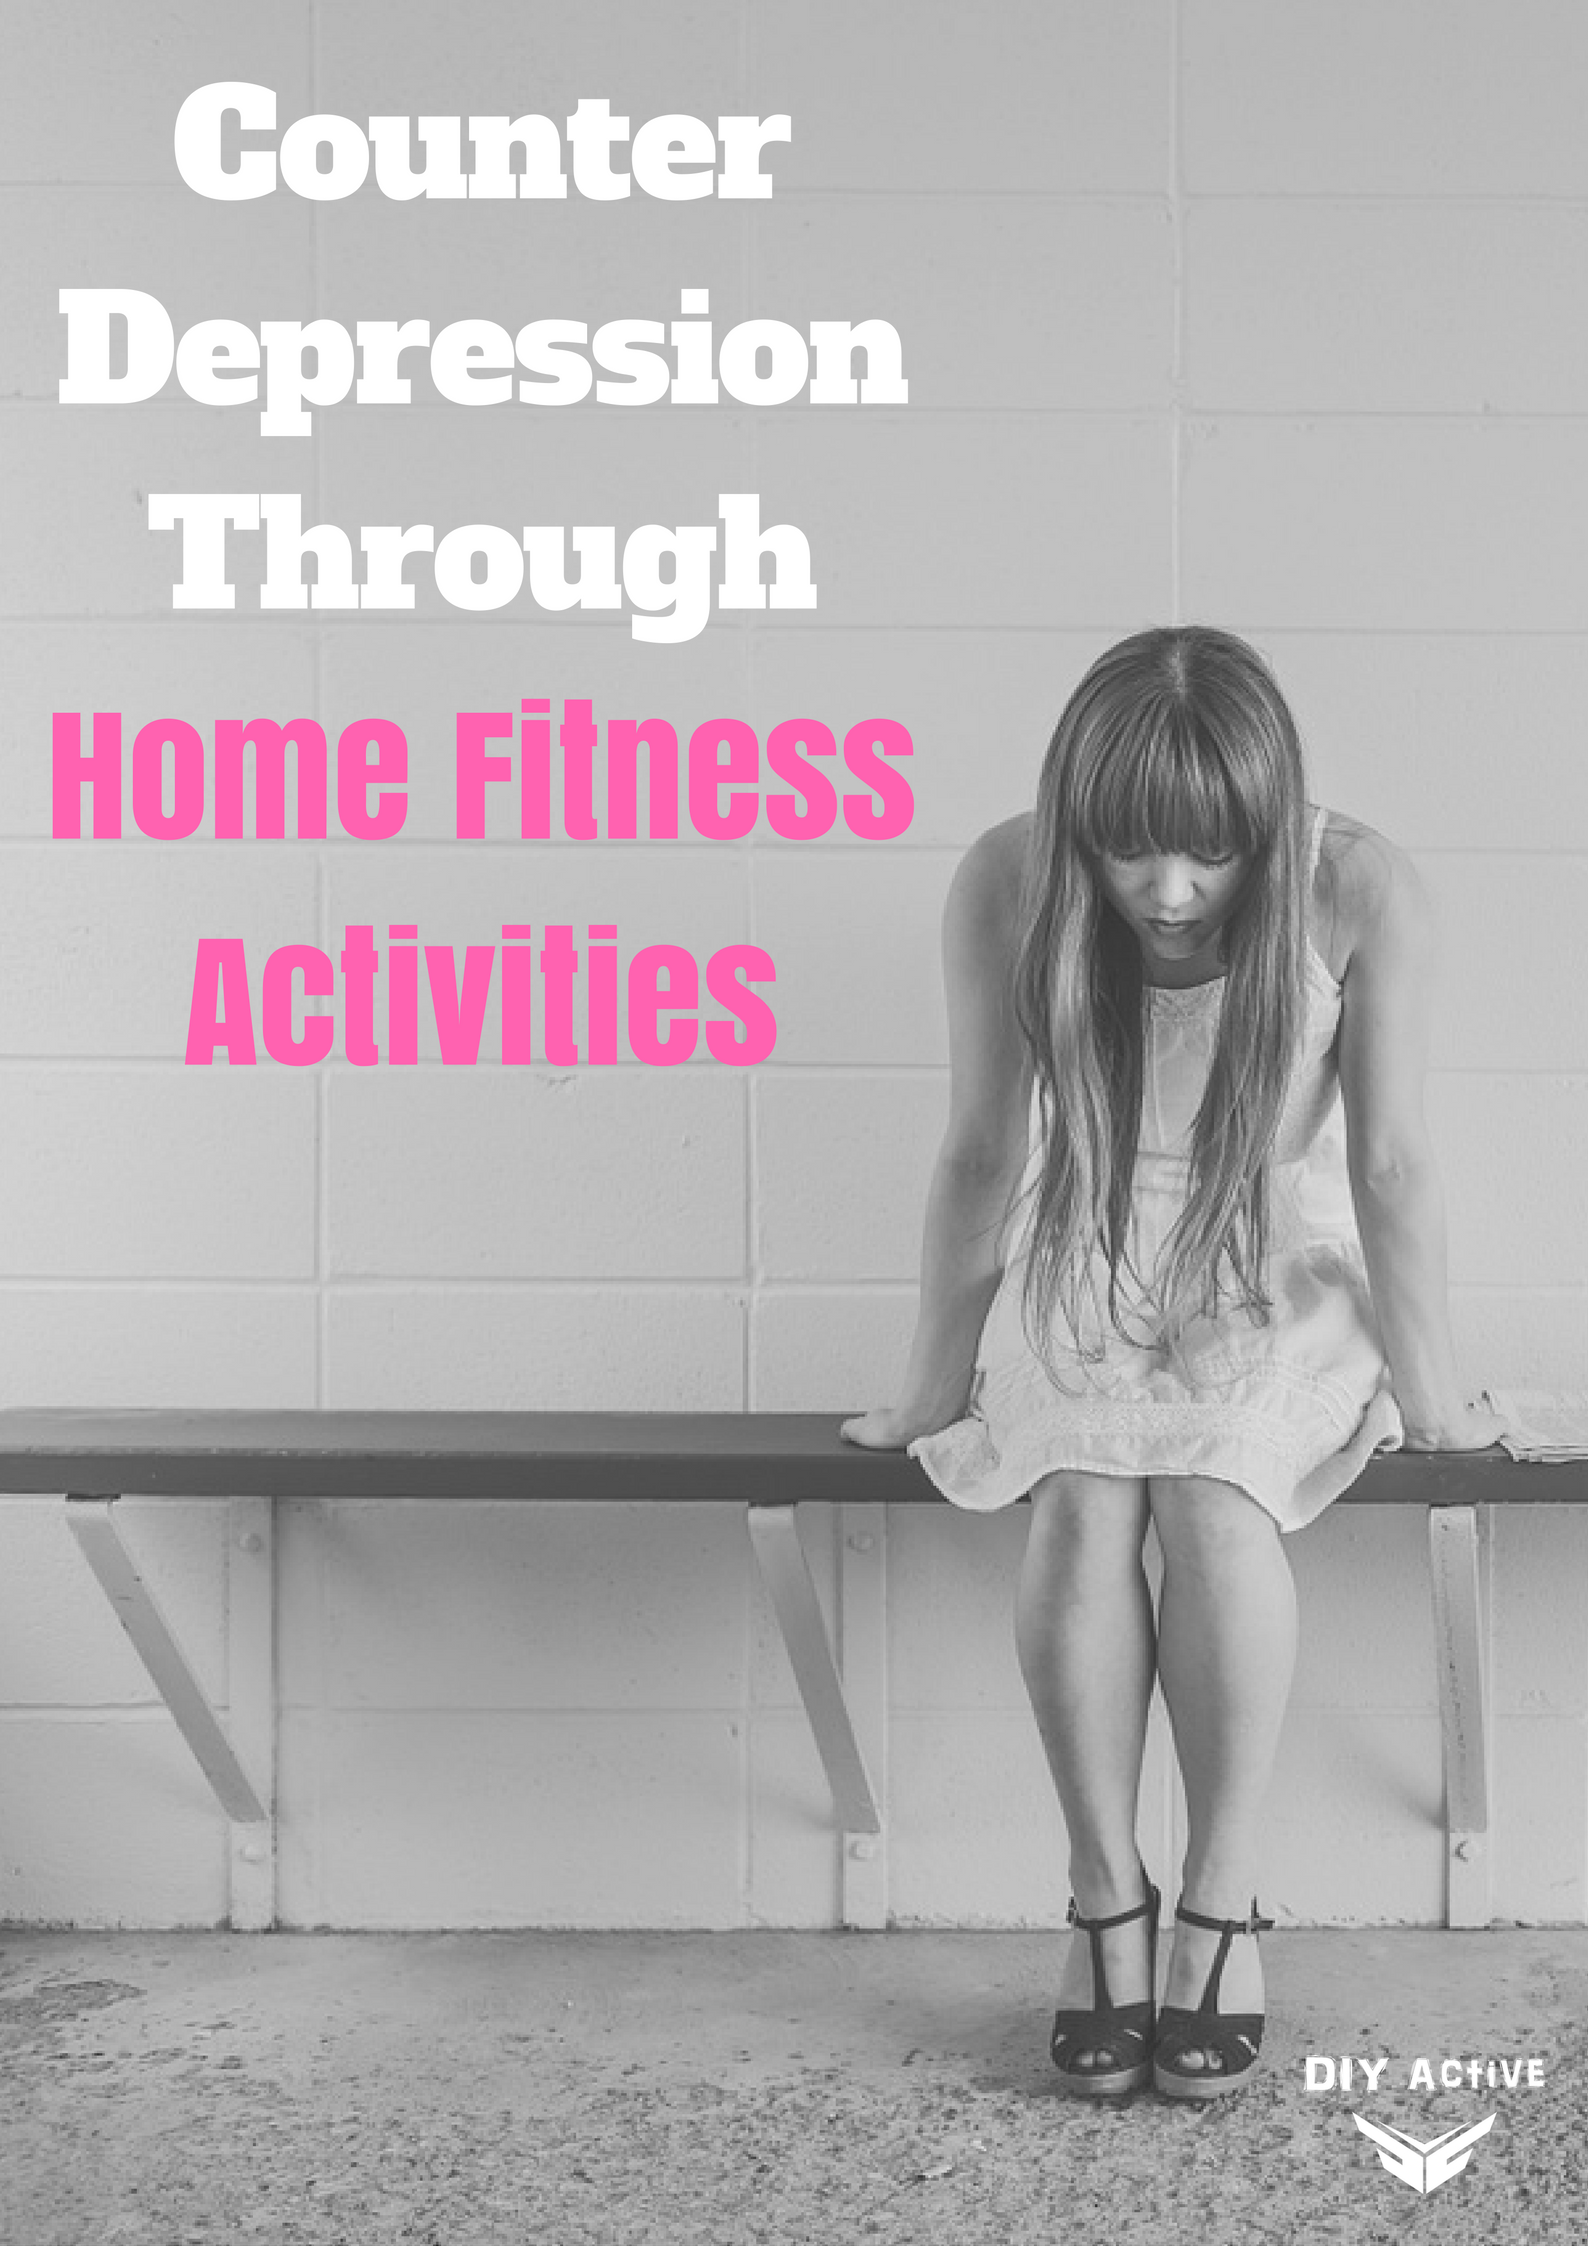 How To Get Out Of Depression With Home Fitness Activities